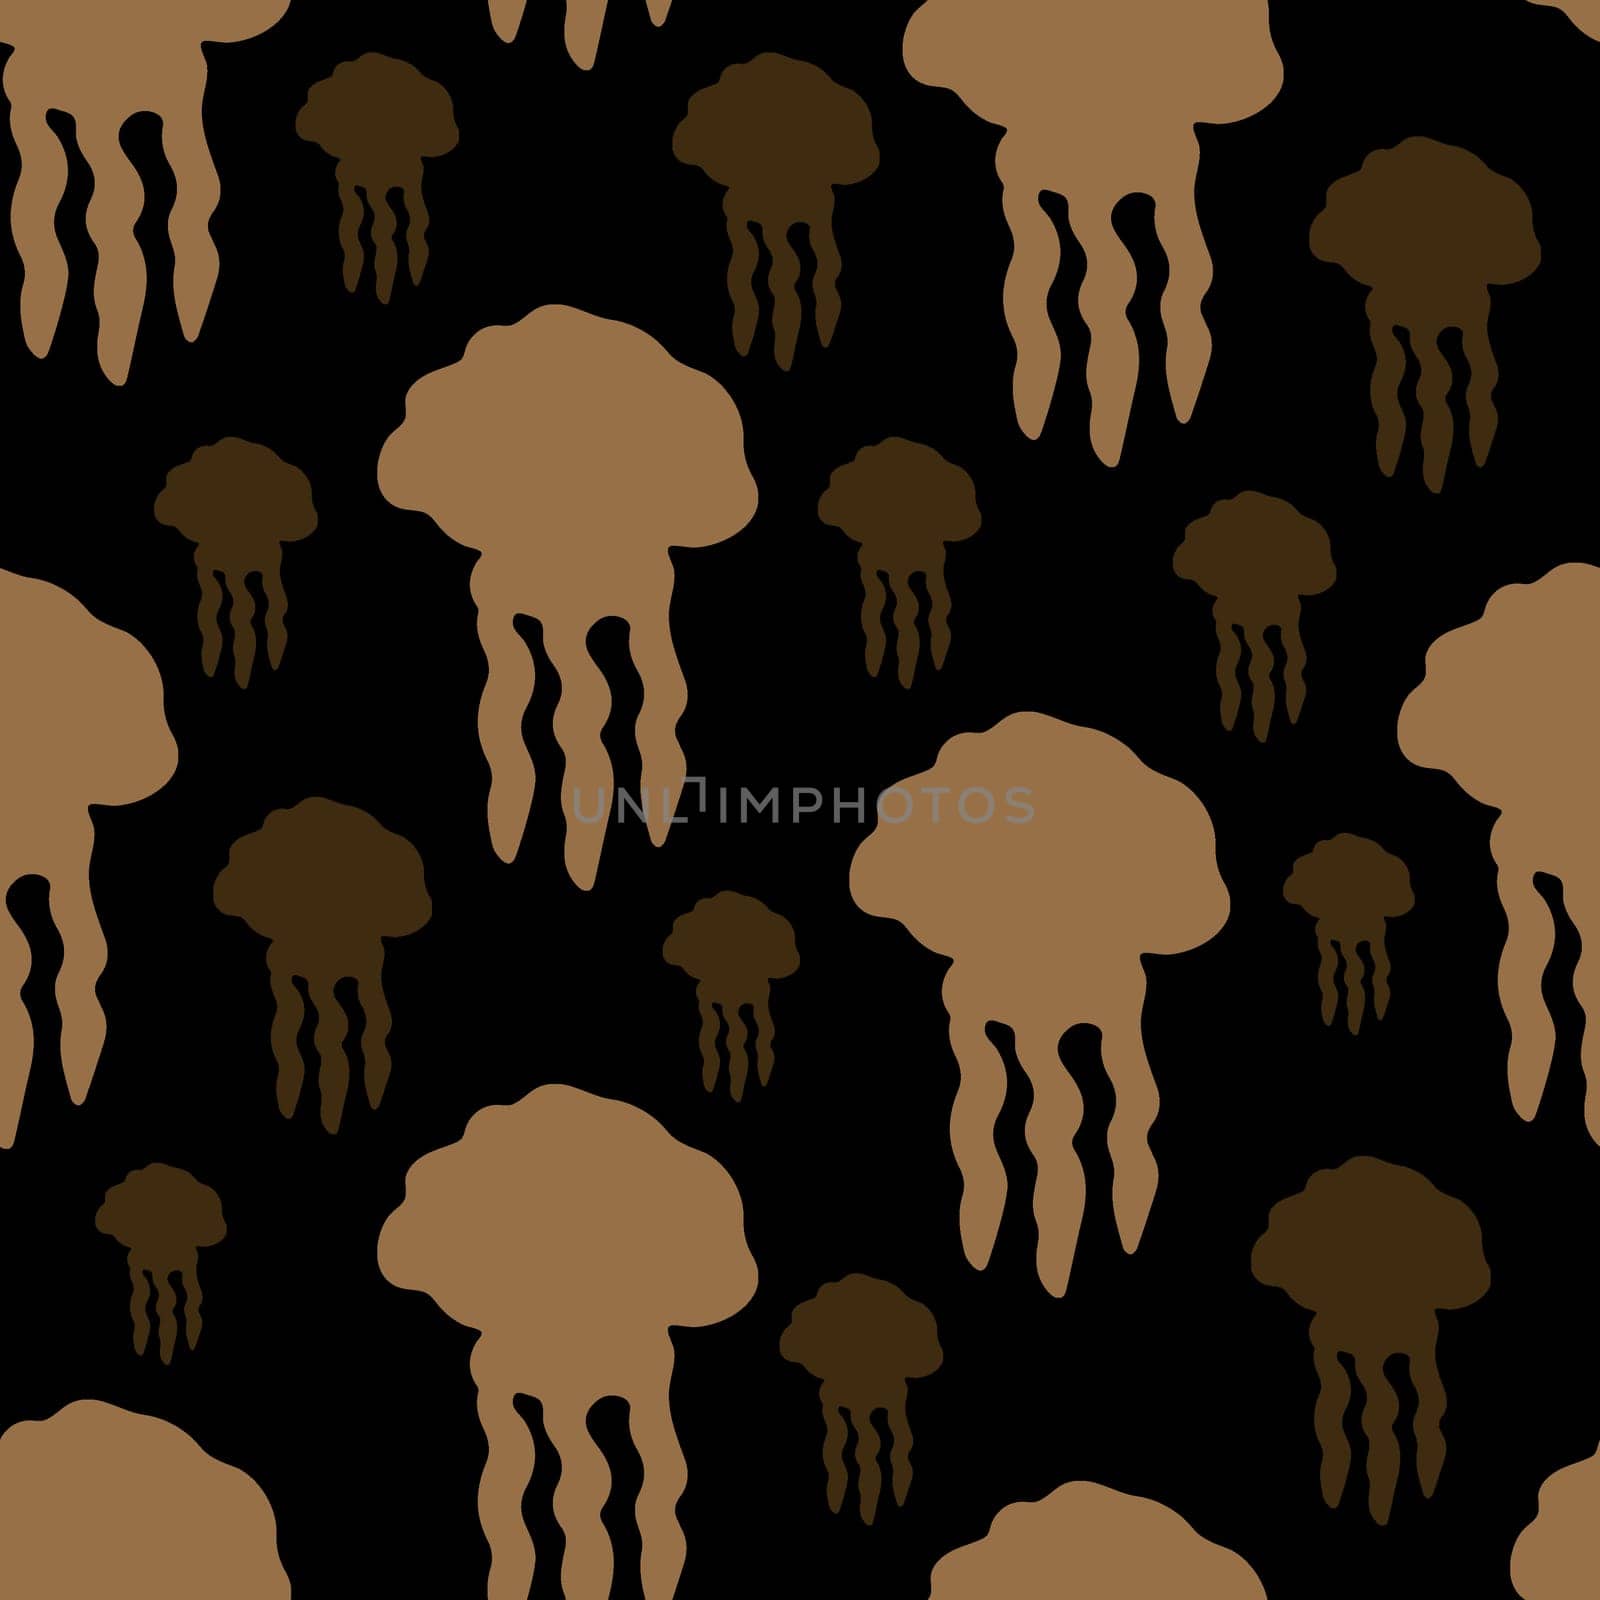 Seamless Repeatable Pattern with Cute Jellyfish in Brown and Black Color. Handdrawn Sketchy Drawing Digital Paper. Creative Background for Children Room Poster, Scrapbooking.